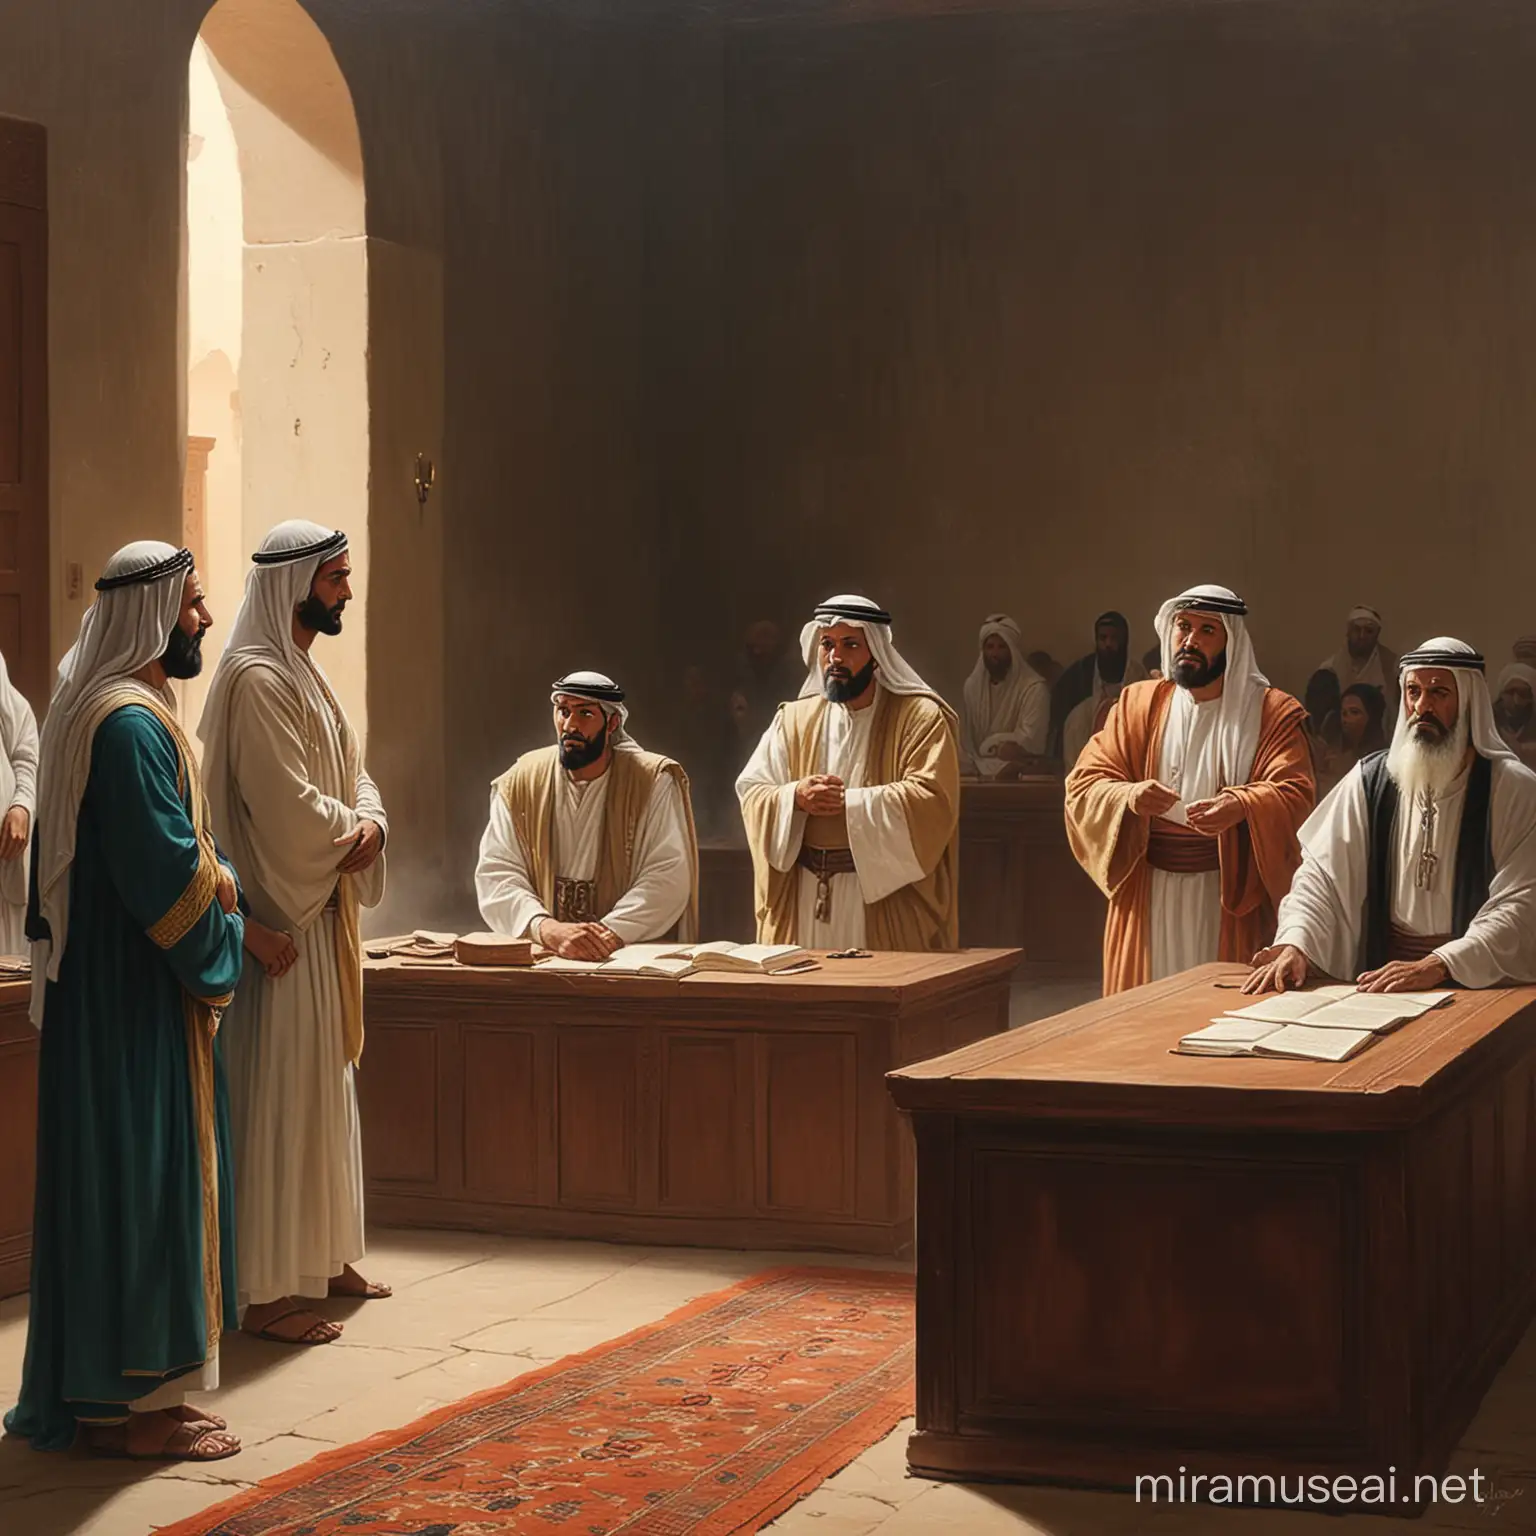 600AD Arabian meeting small group in room, in judging court with one man get shock by the judge decission
